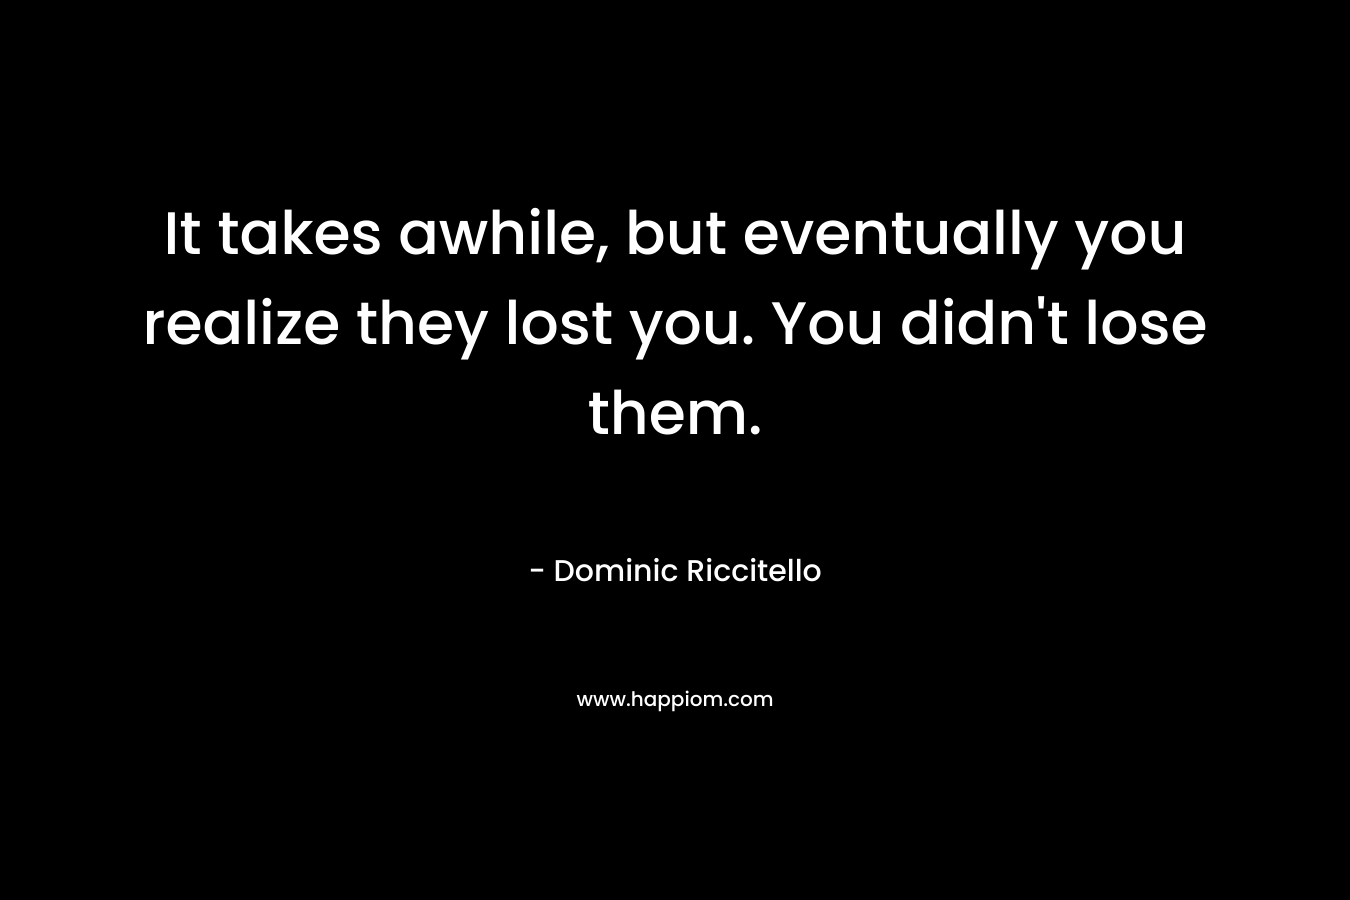 It takes awhile, but eventually you realize they lost you. You didn’t lose them. – Dominic Riccitello